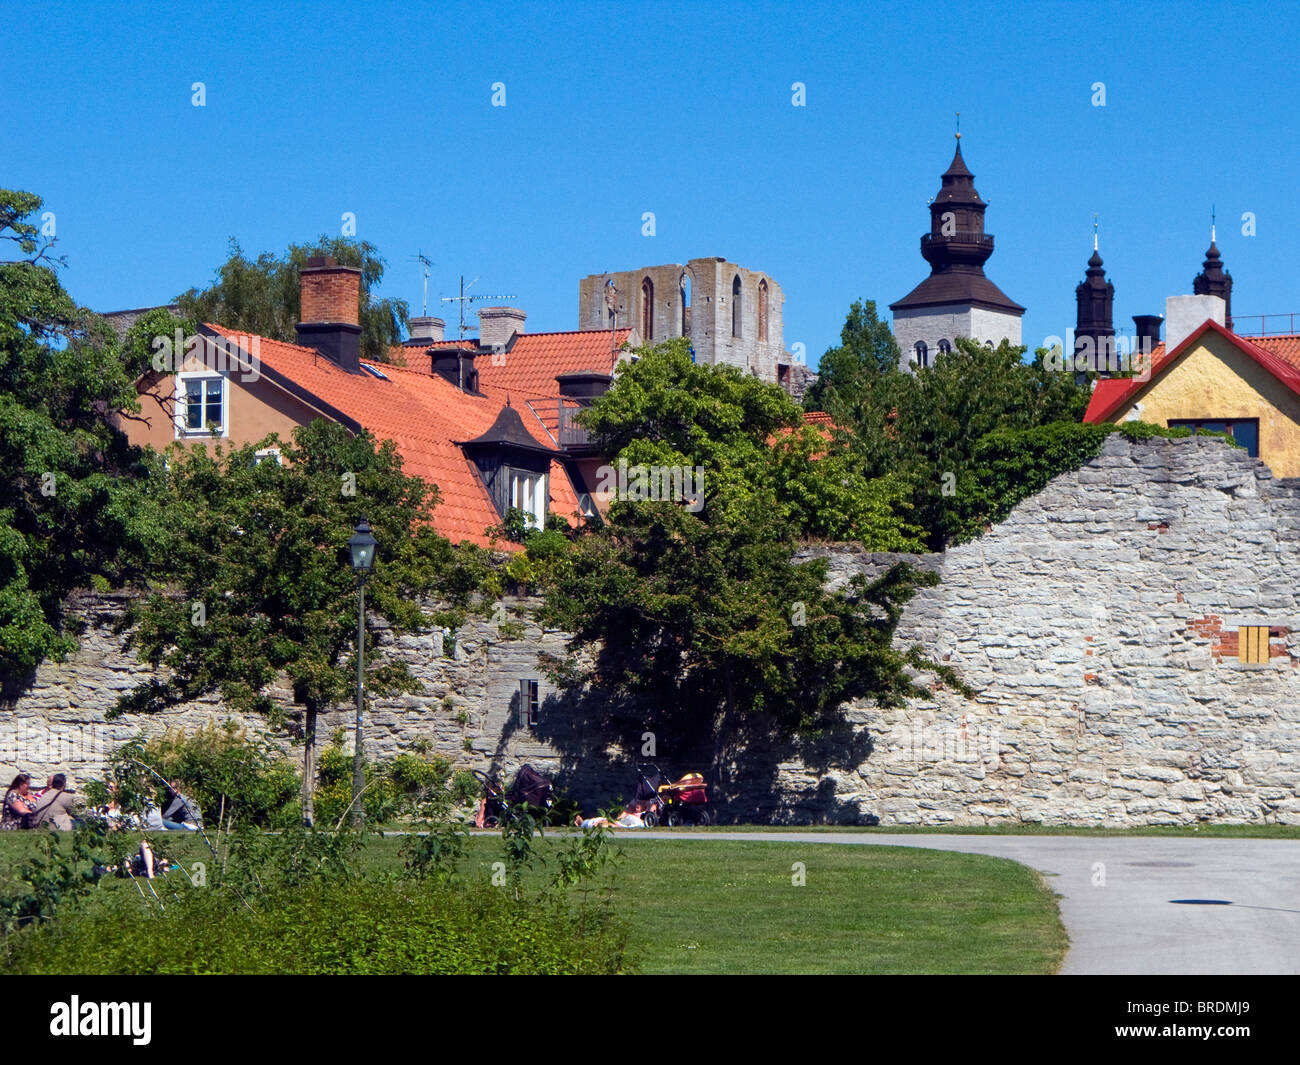 The walled Hanseatic town of Visby, Gotland, Sweden is on the UNESCO world heritage list. Stock Photo